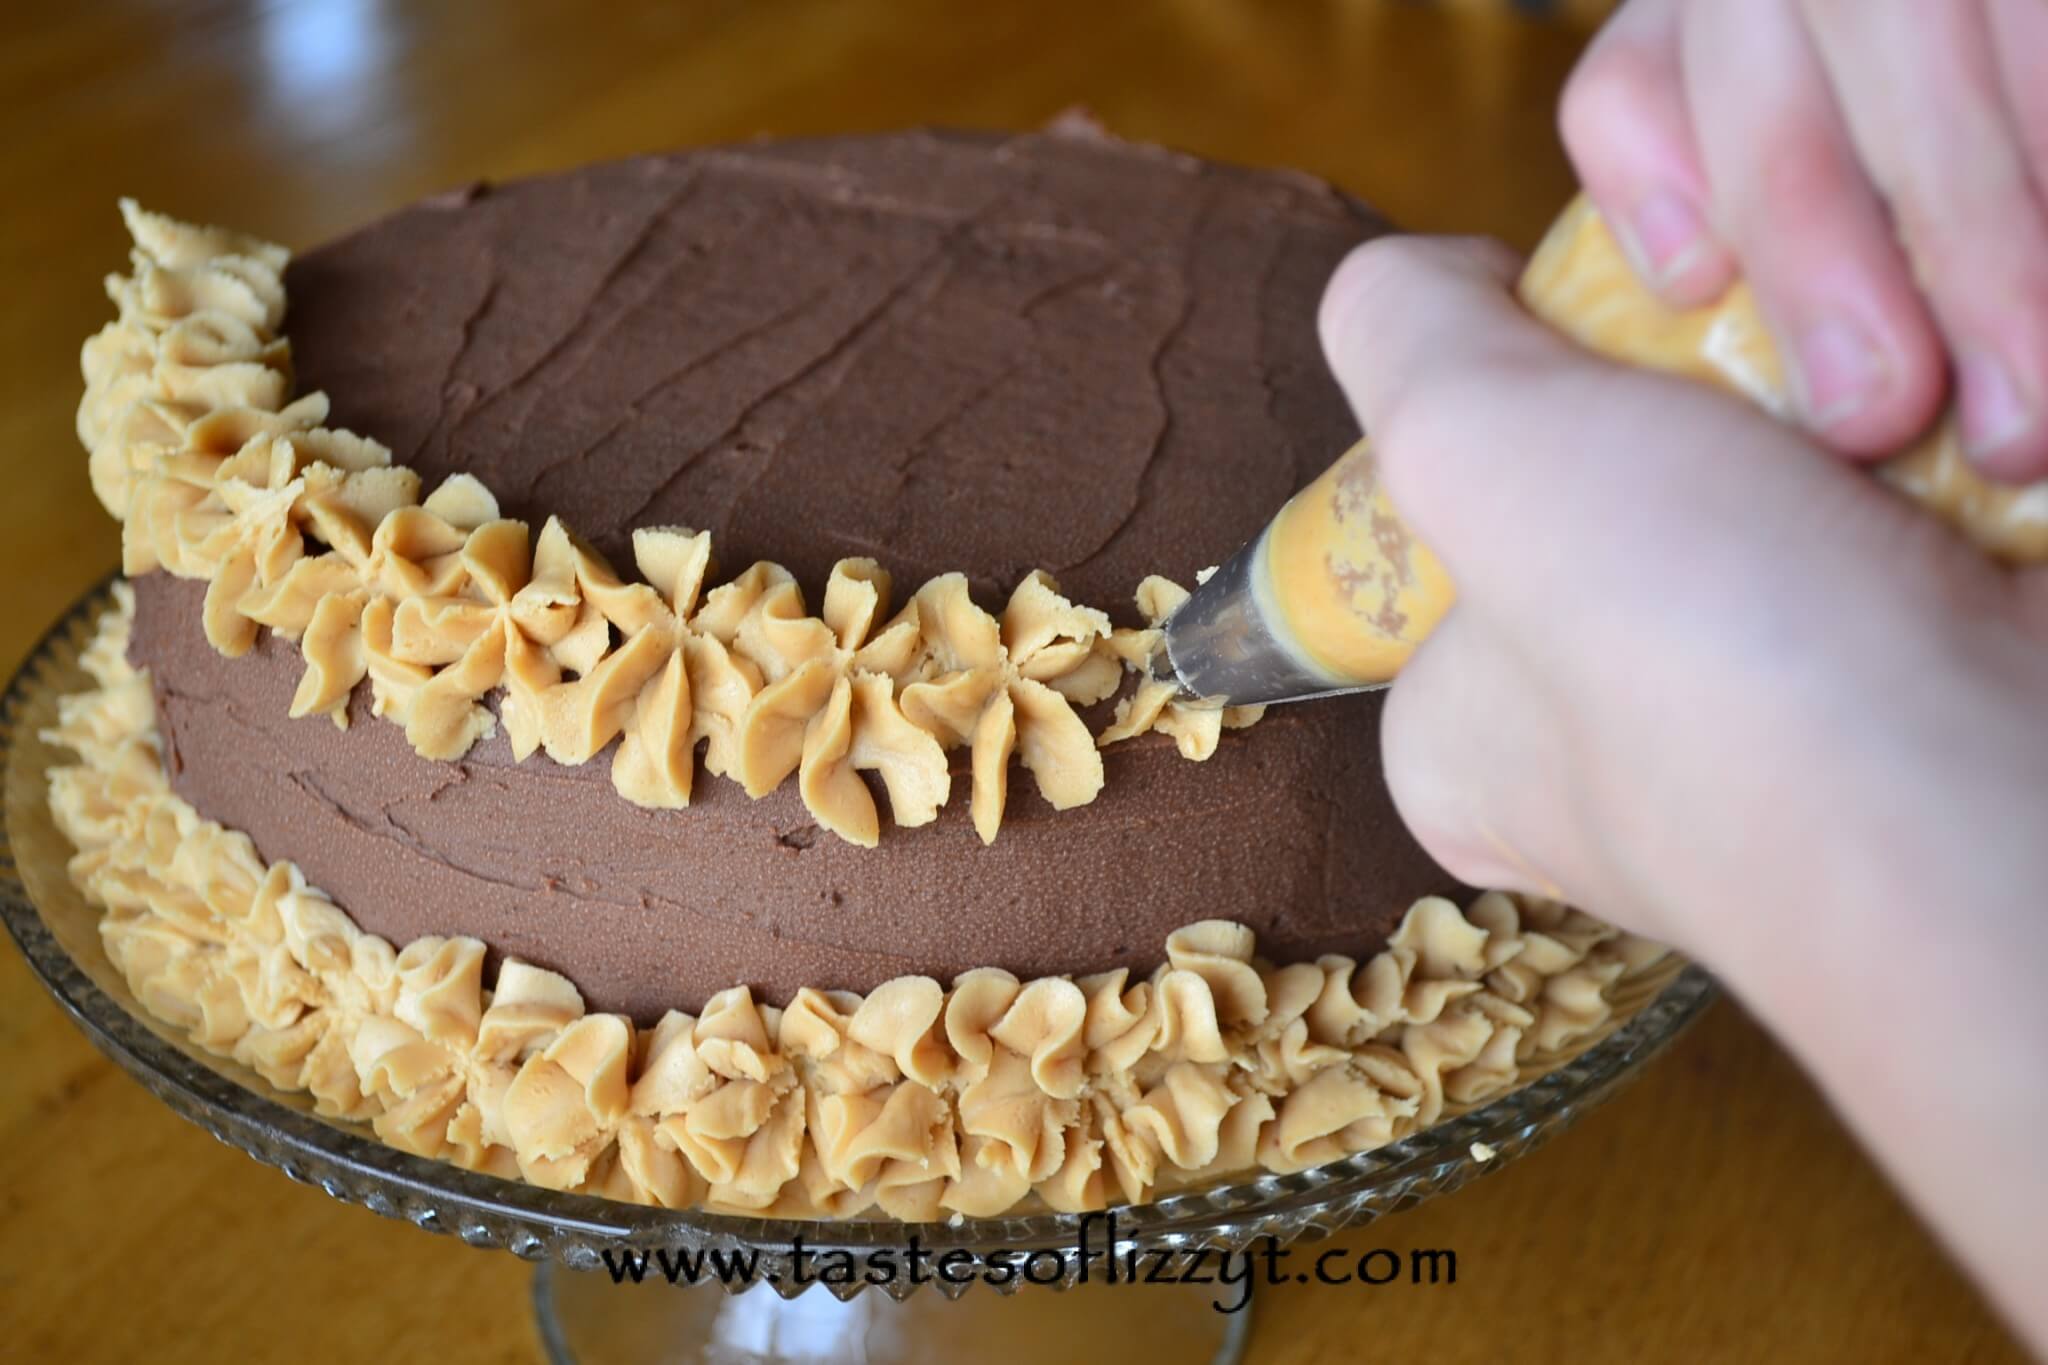 Reese's Cake {Homemade Chocolate Cake with Chocolate and Peanut Butter